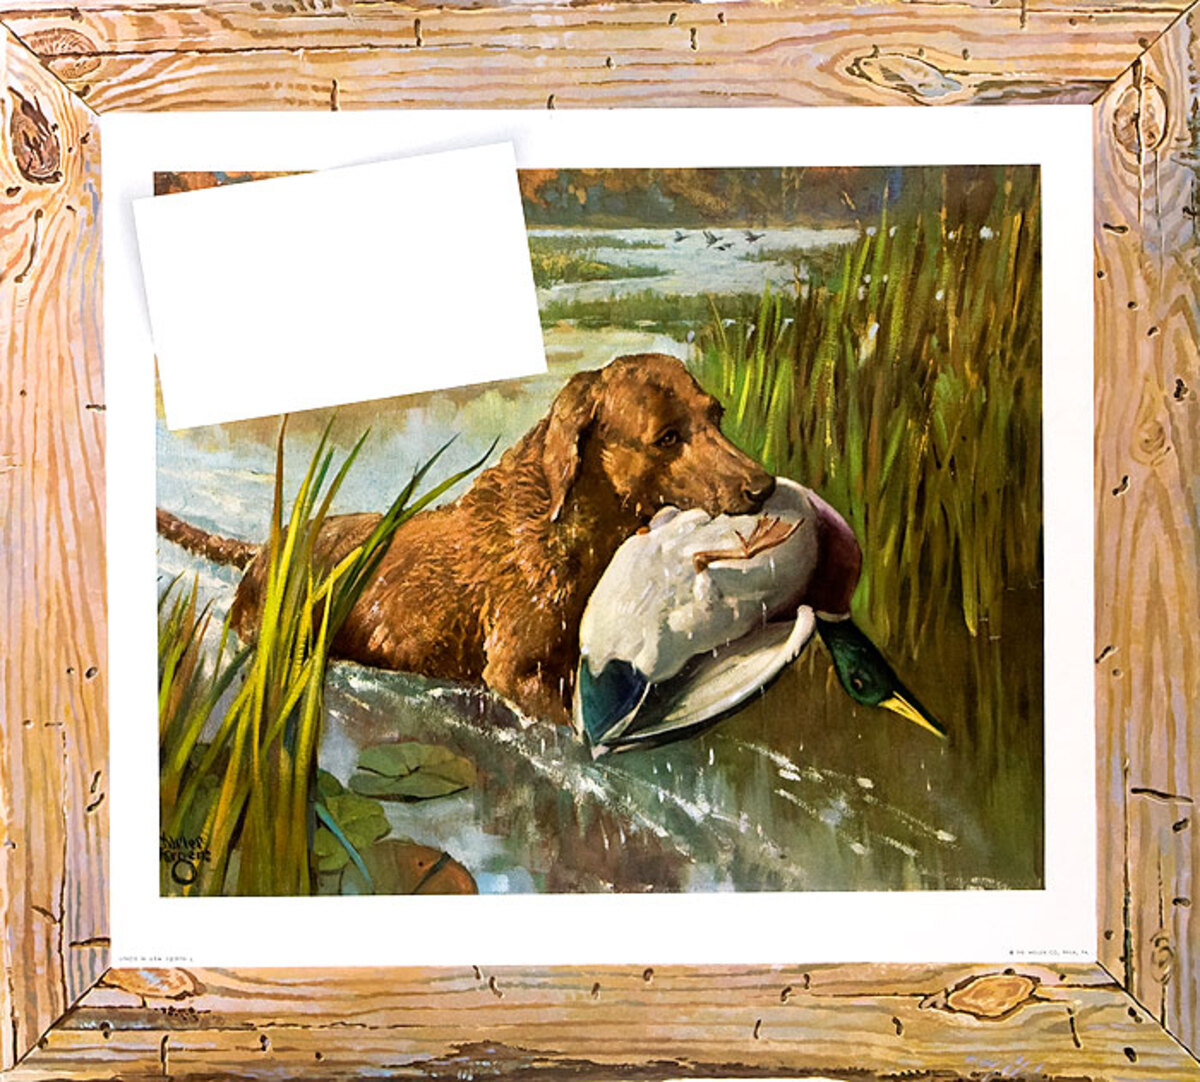 Retriever With Duck in Mouth Huge Original Press Sheet